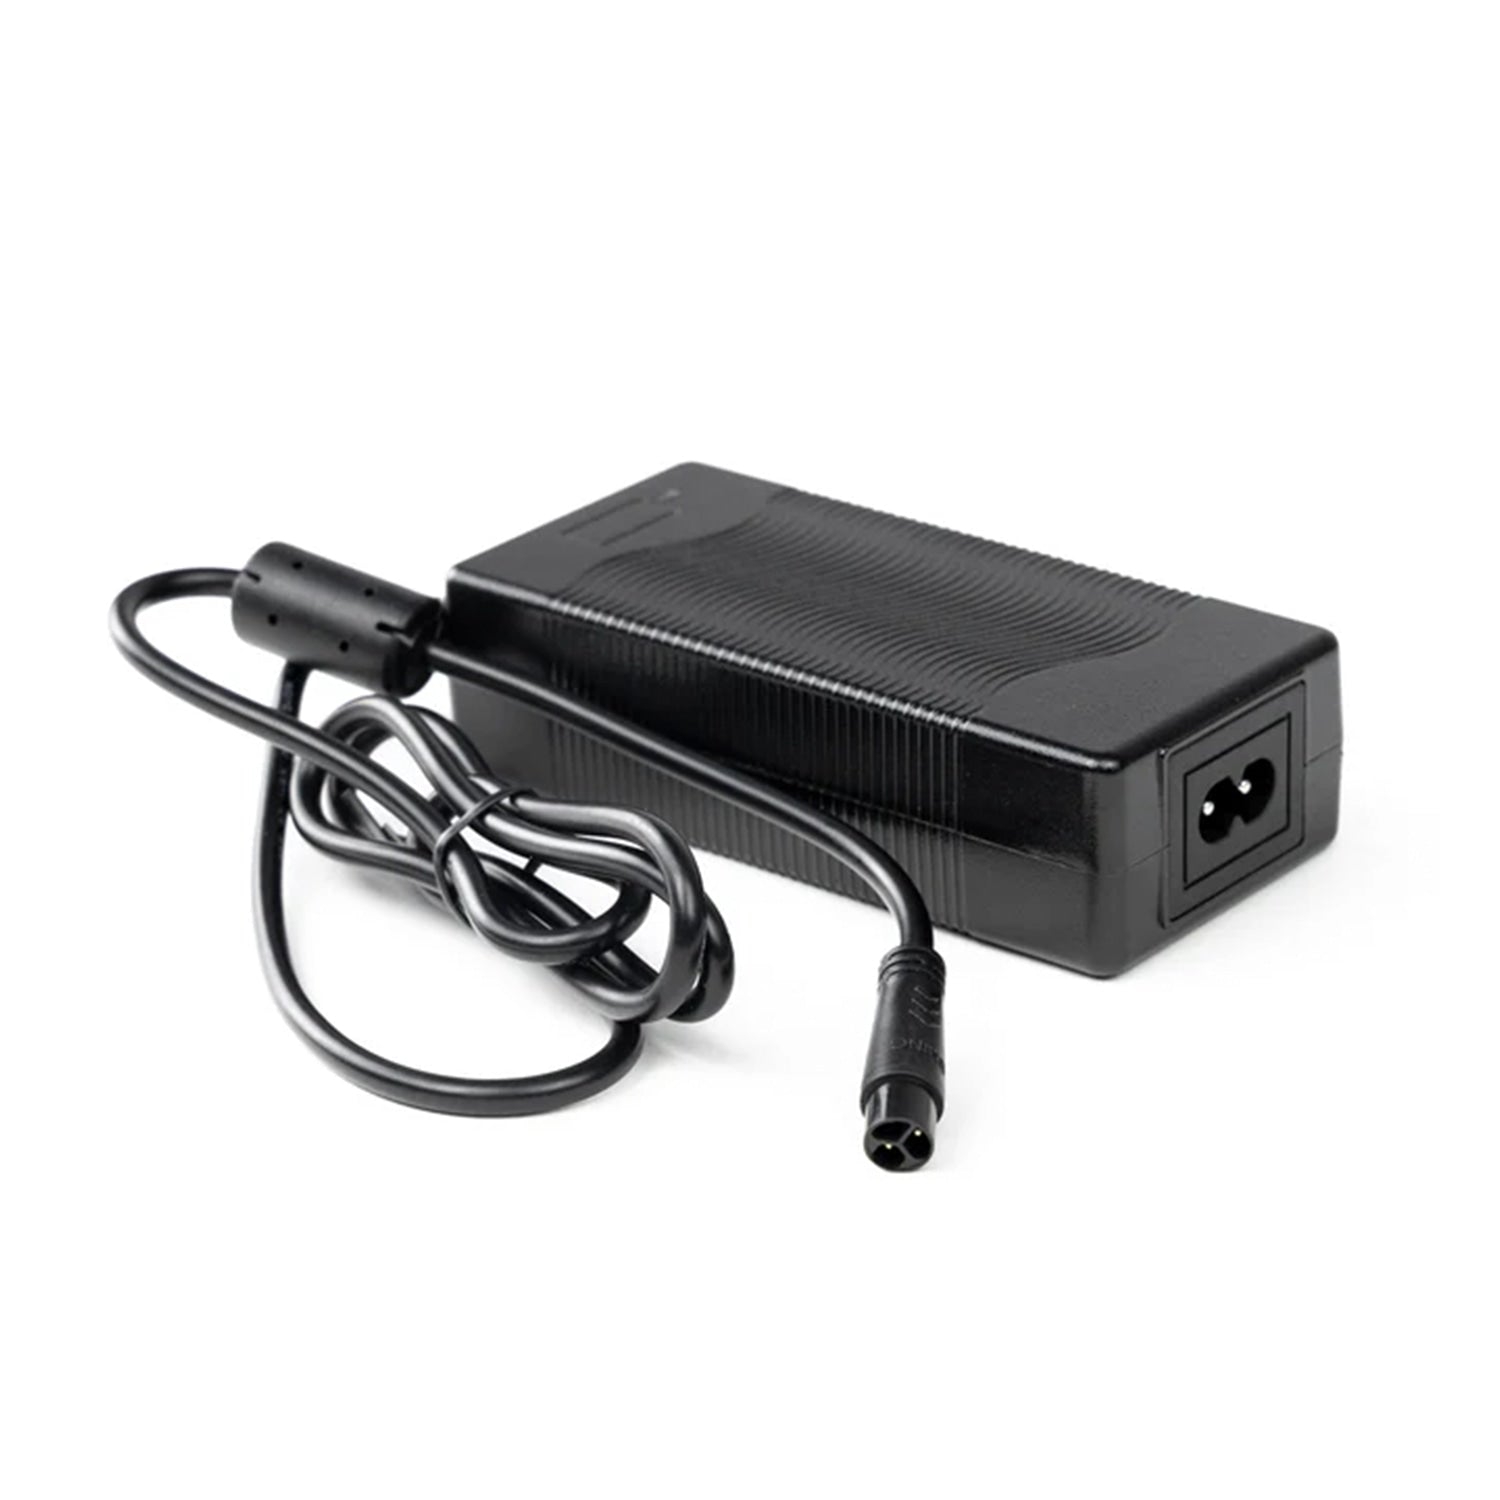 Electric Bike Charger with Aviation Connector - 2A Output - UL Listed